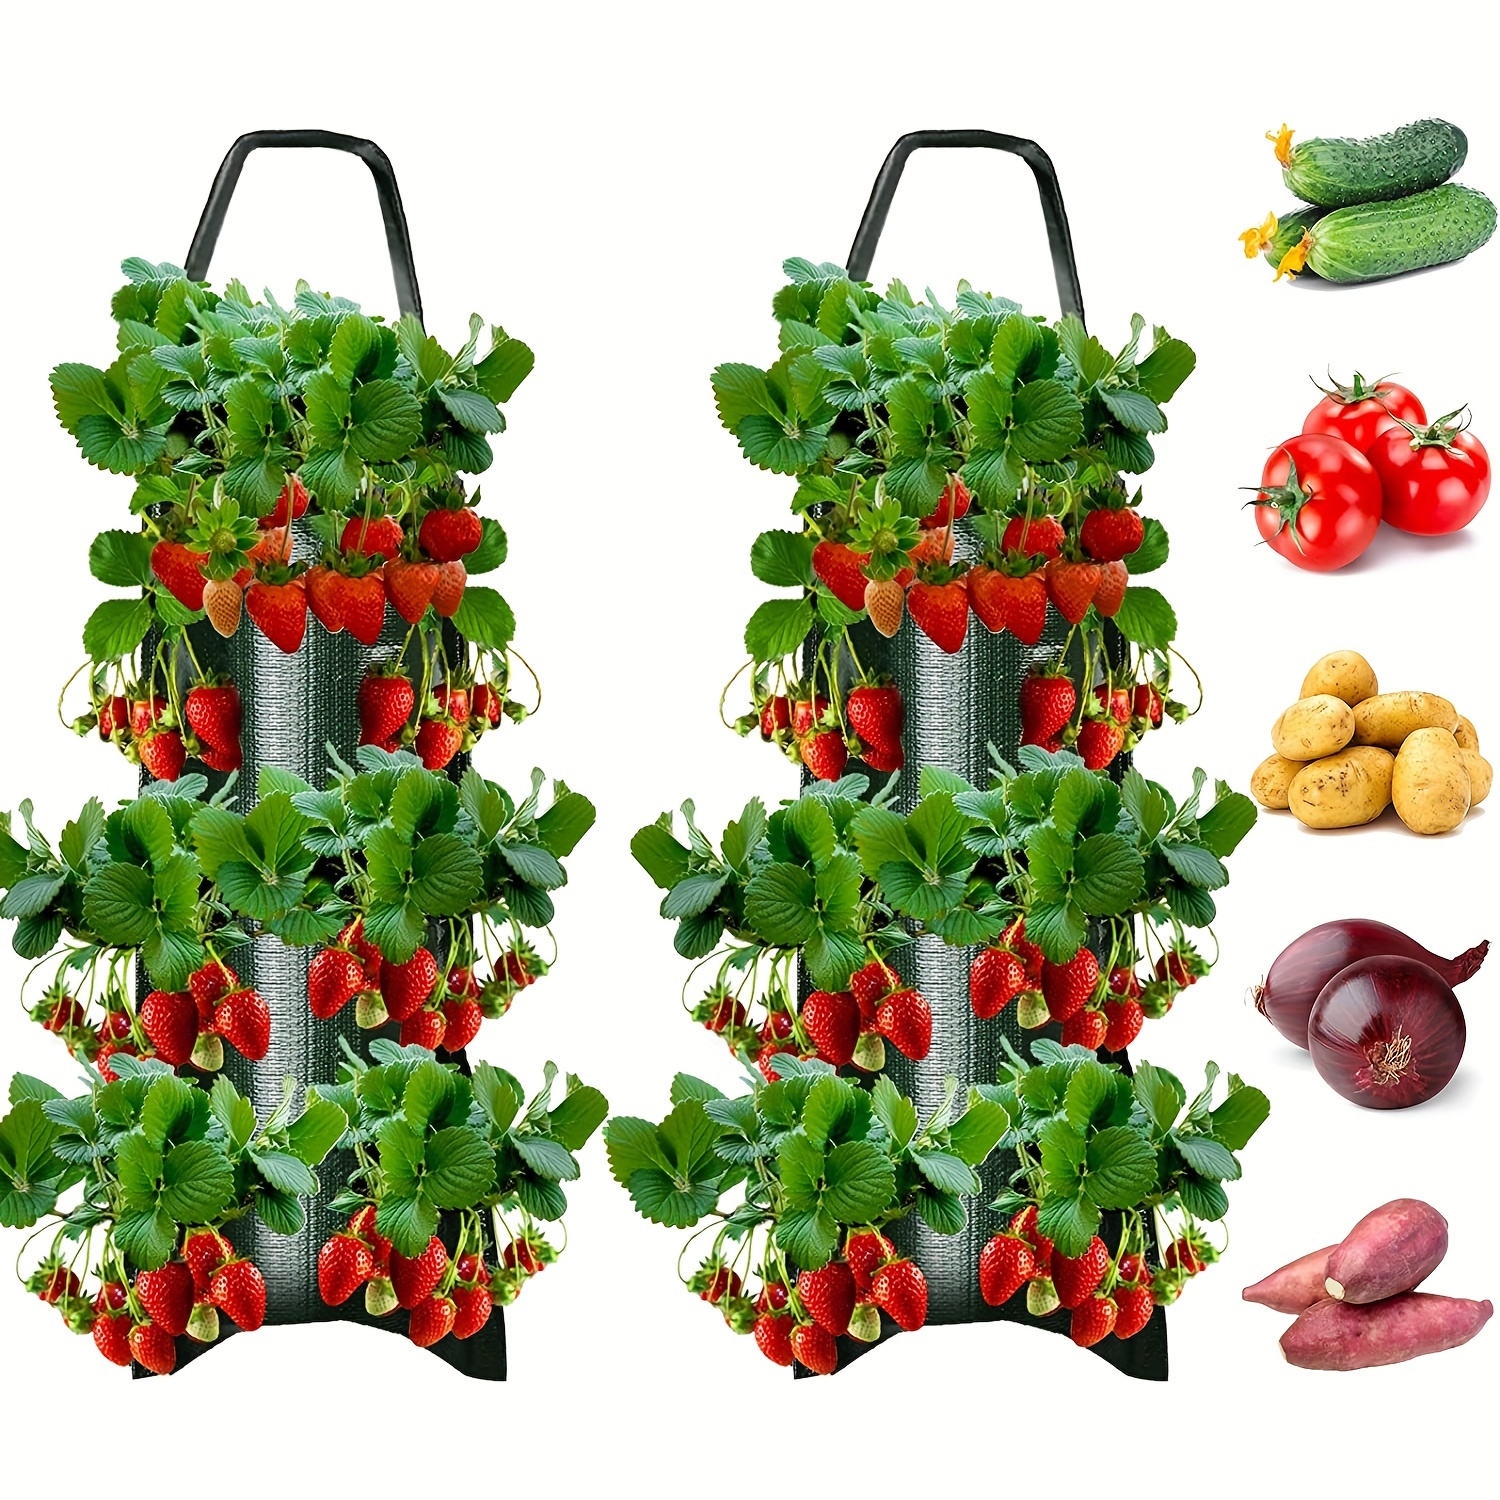 

2pcs Hanging Strawberry Flowerpot Bag, Strawberry Planting Bag, With 8 Holes, For Strawberry Tomato And Pepper Inverted Tomato Planter Vegetable Planting Bag, Pots, Planters & Container Accessories